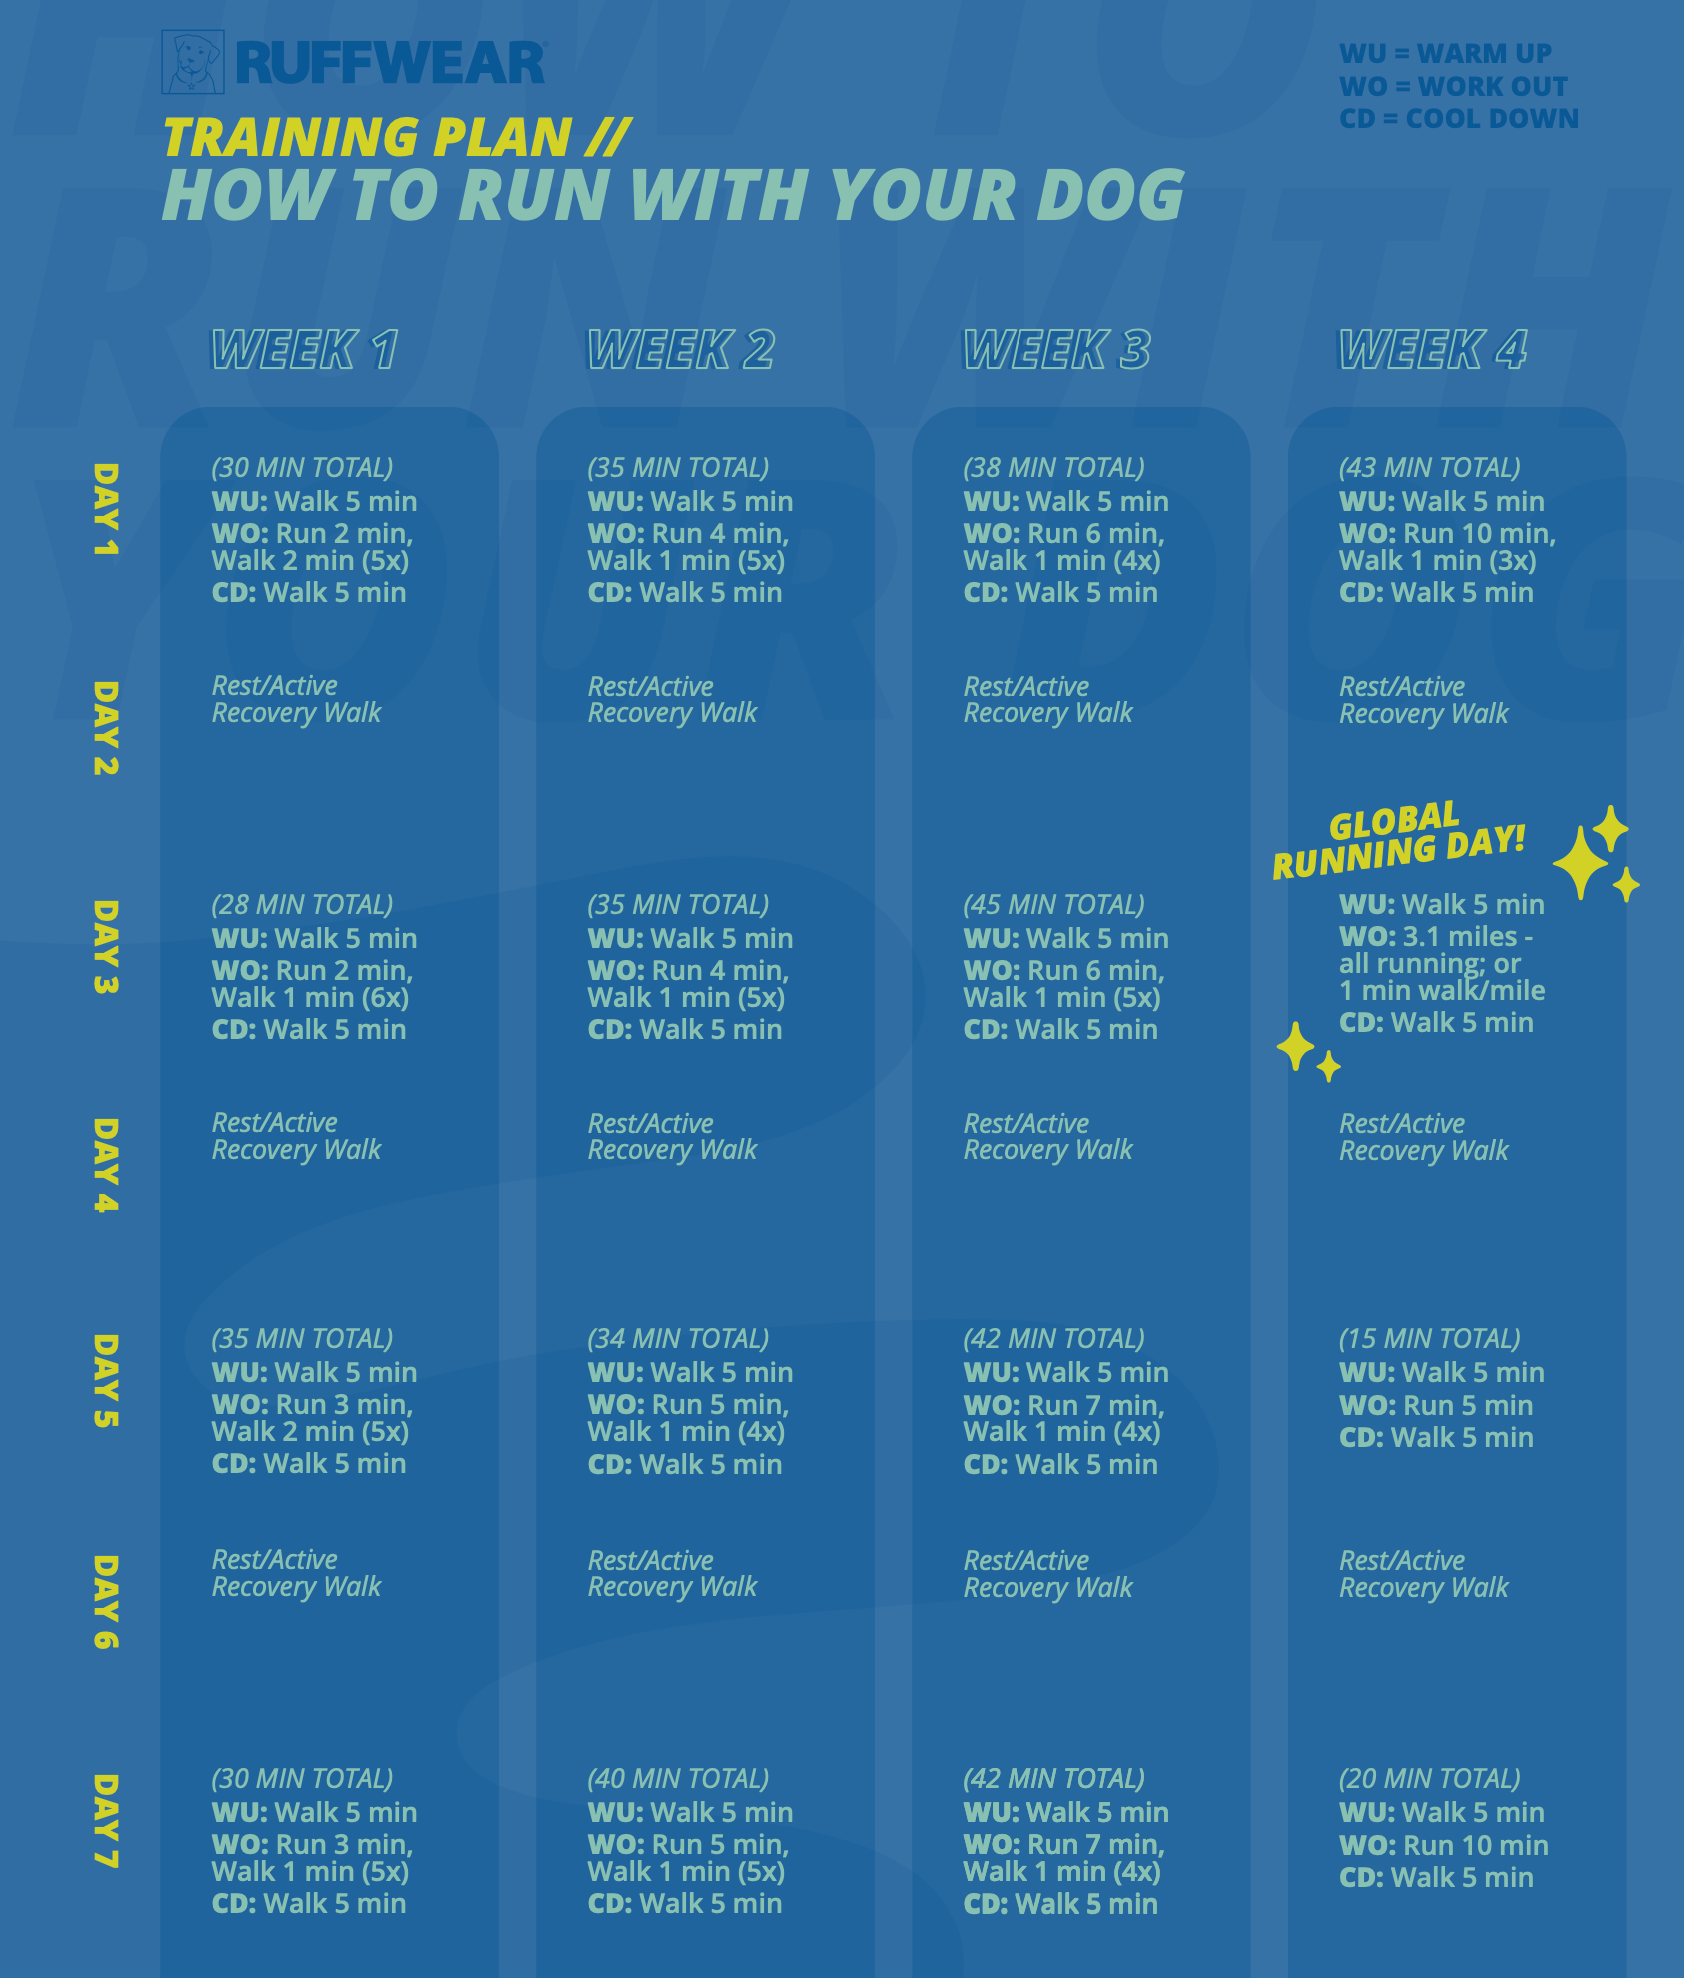 4-week training plan for running with your dog